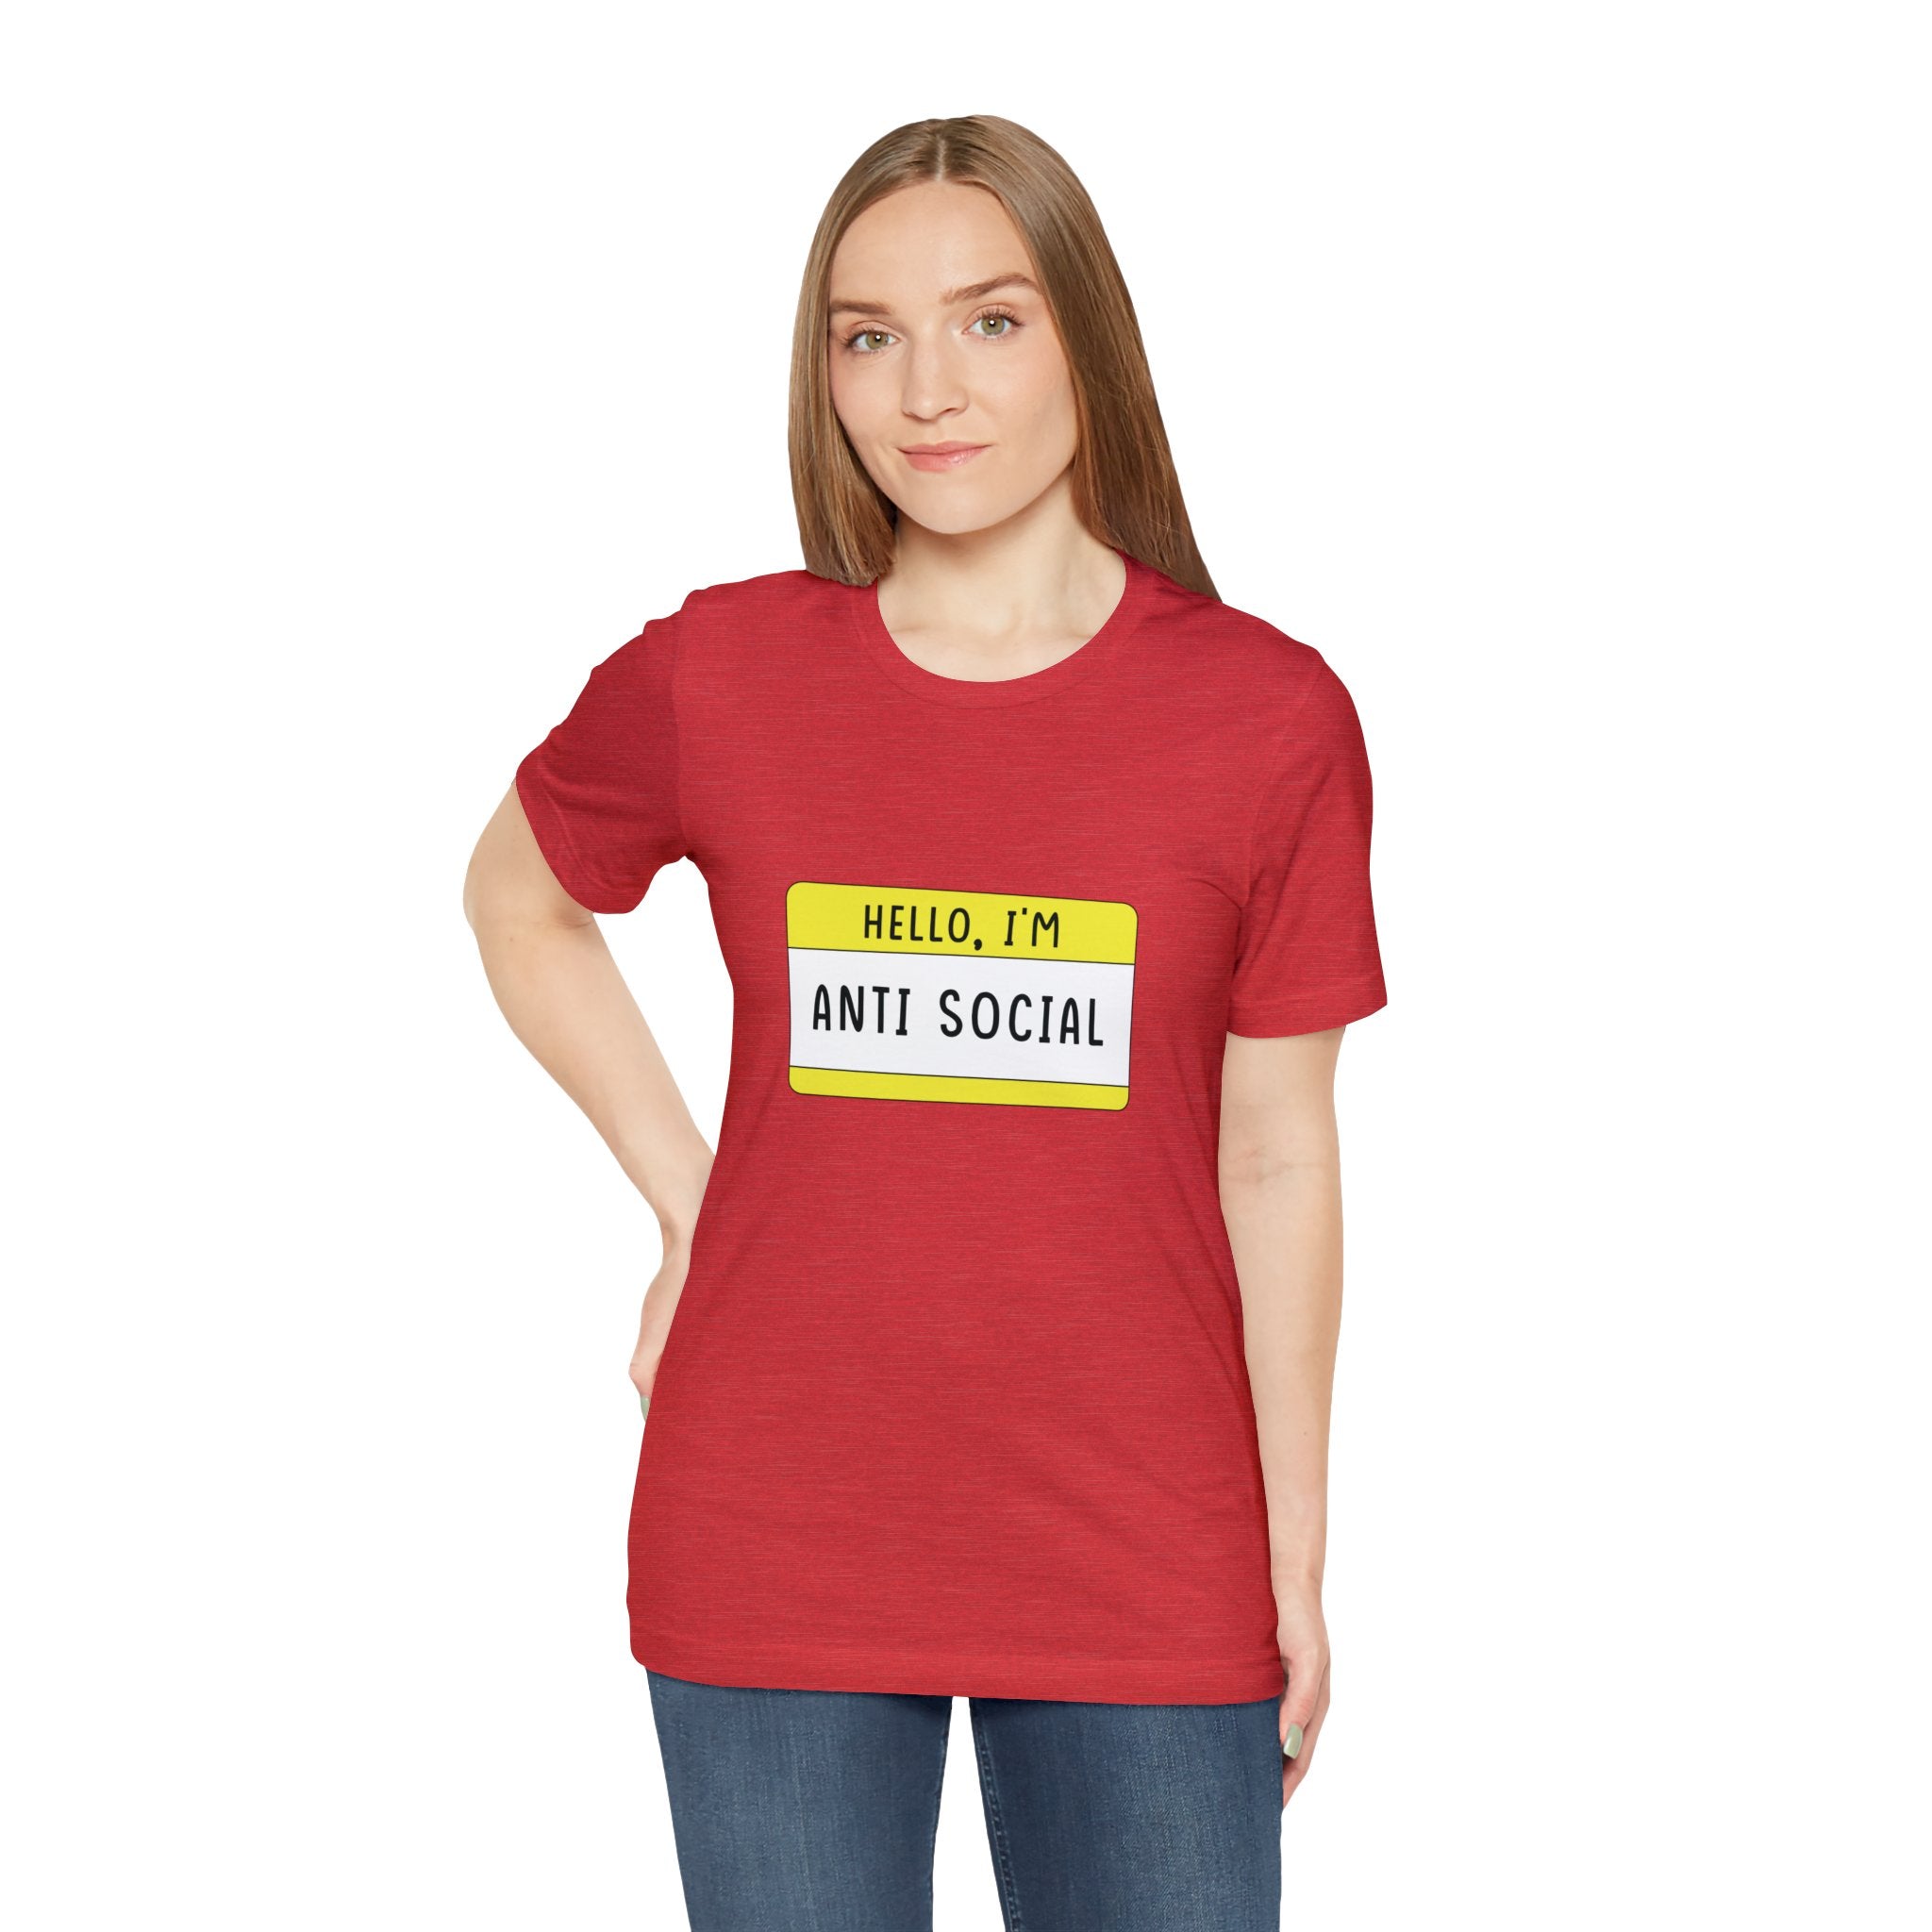 Woman in red Hello, I'm Anti Social T-Shirt with "hello, I'm anti-social" printed on a yellow name tag.